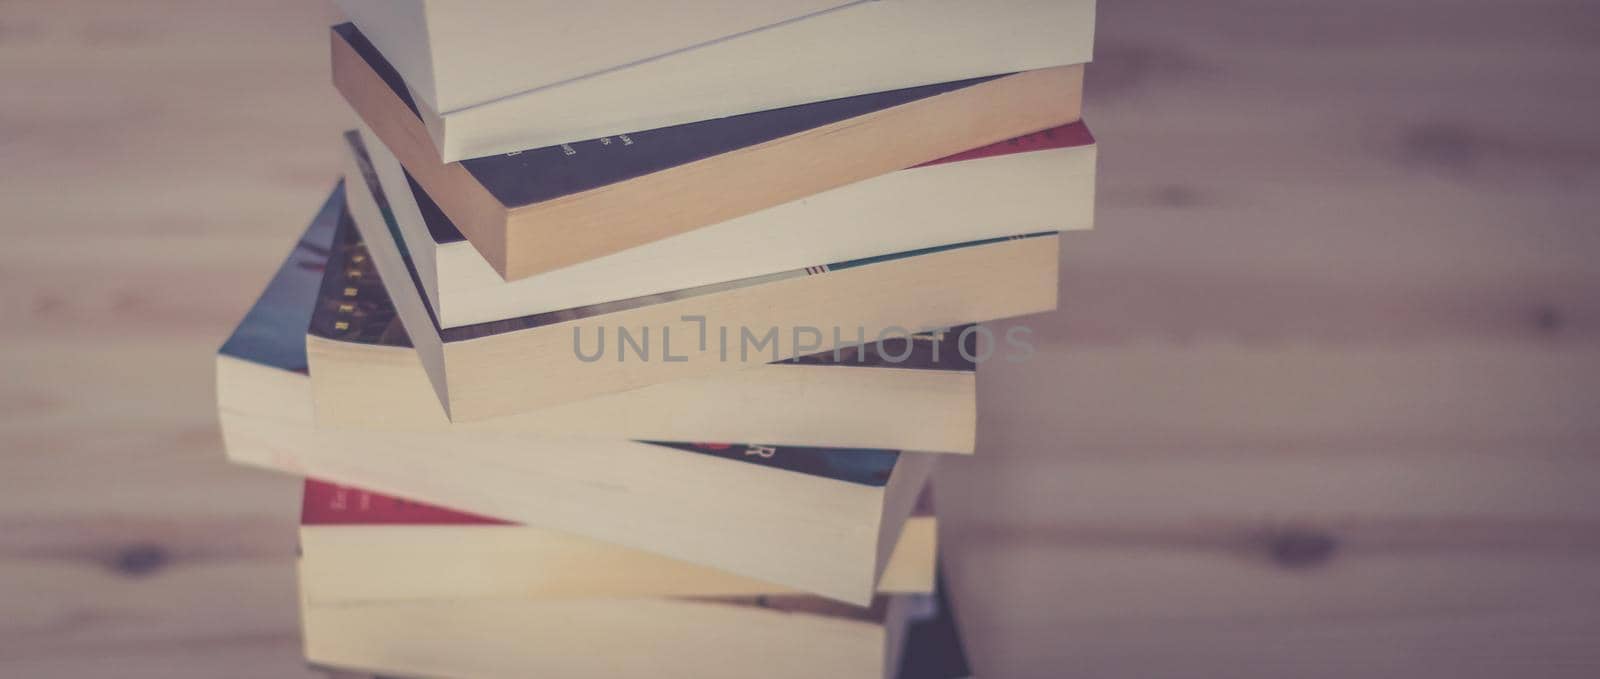 Knowledge and science concept: Stack of books, wooden background by Daxenbichler